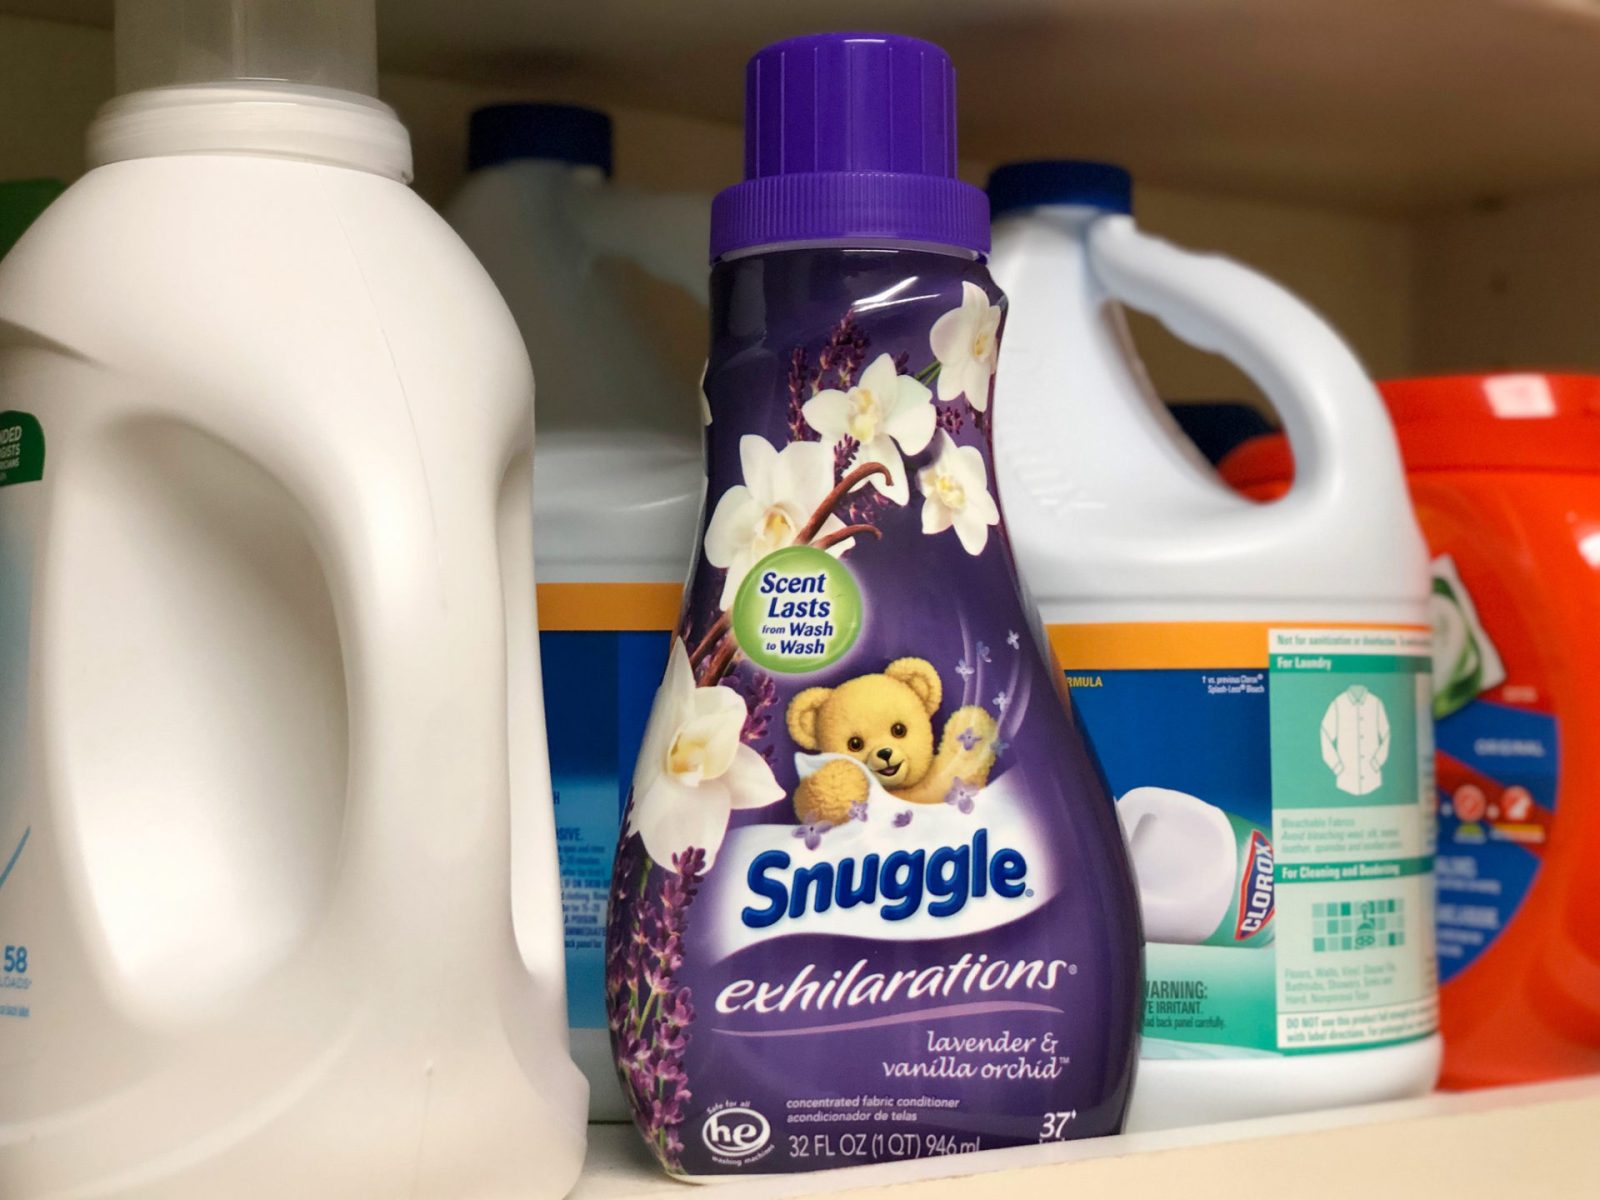 Snuggle Fabric Softener or Dryer Sheets As Low As $2.49 At Kroger